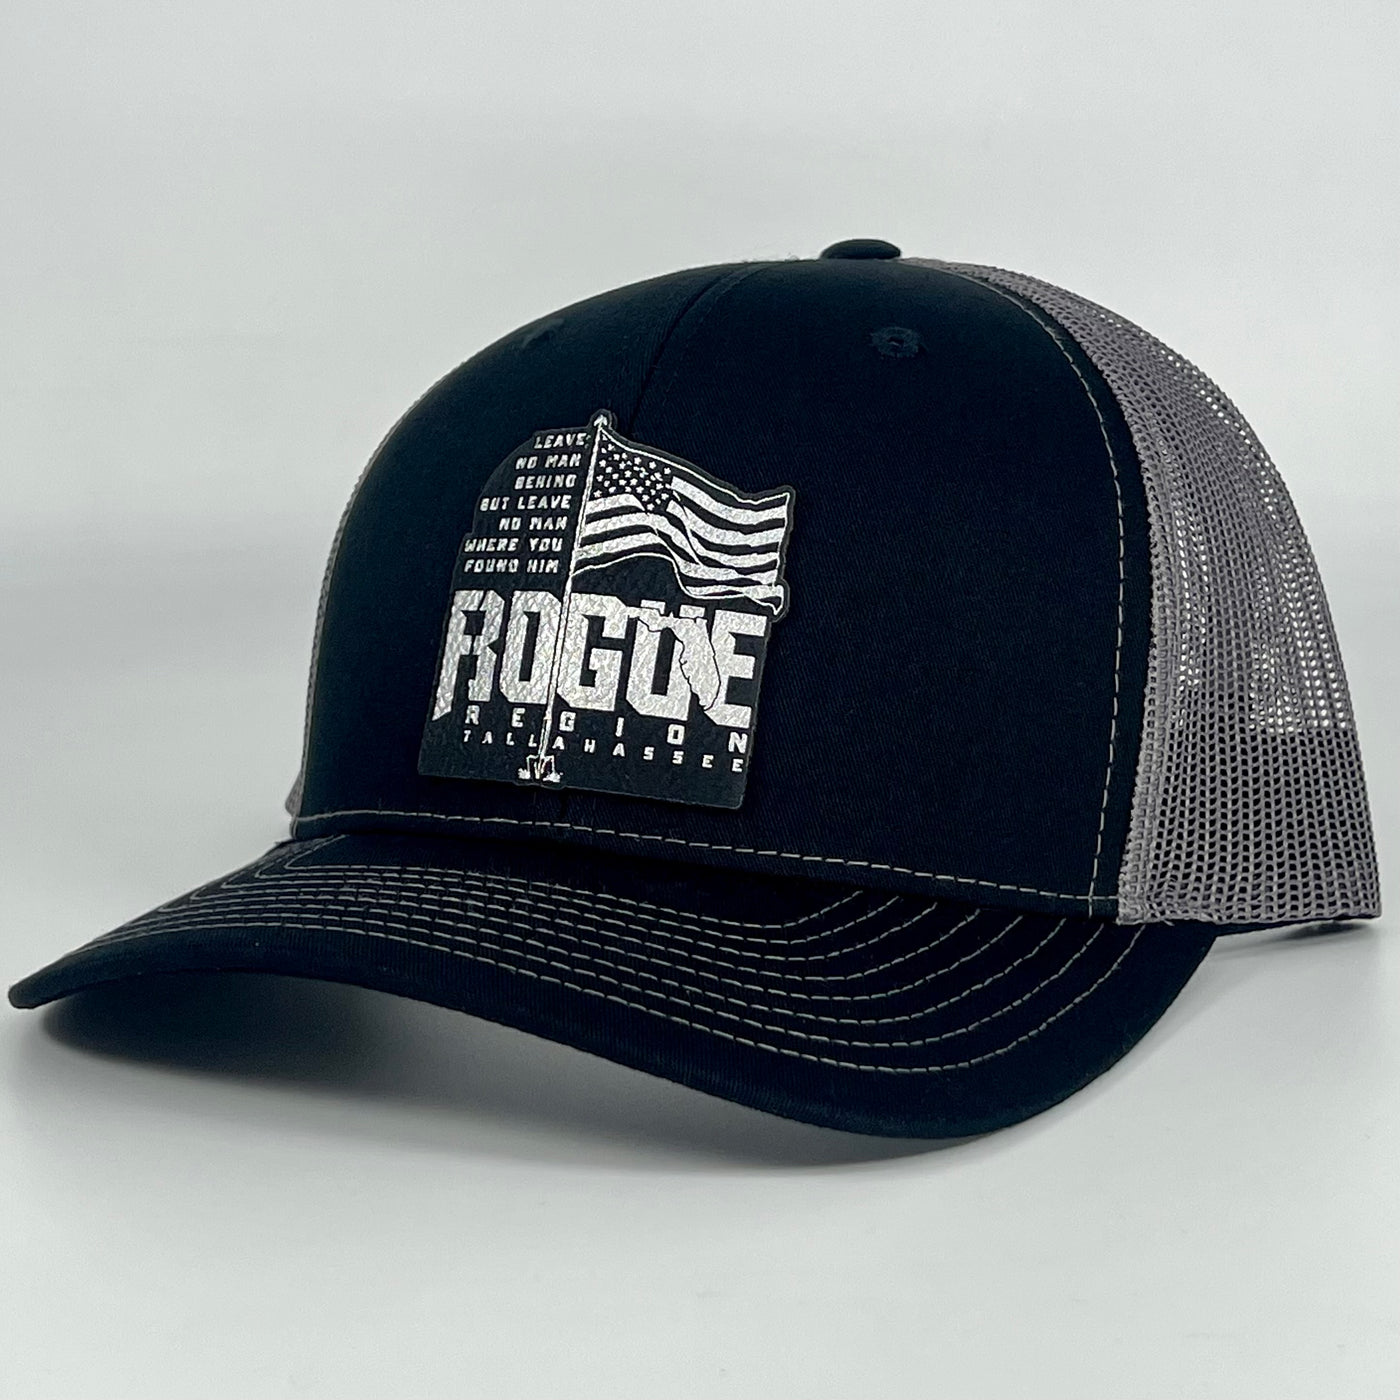 F3 Rogue Region Leatherette Patch Hat Pre-Order November 2022